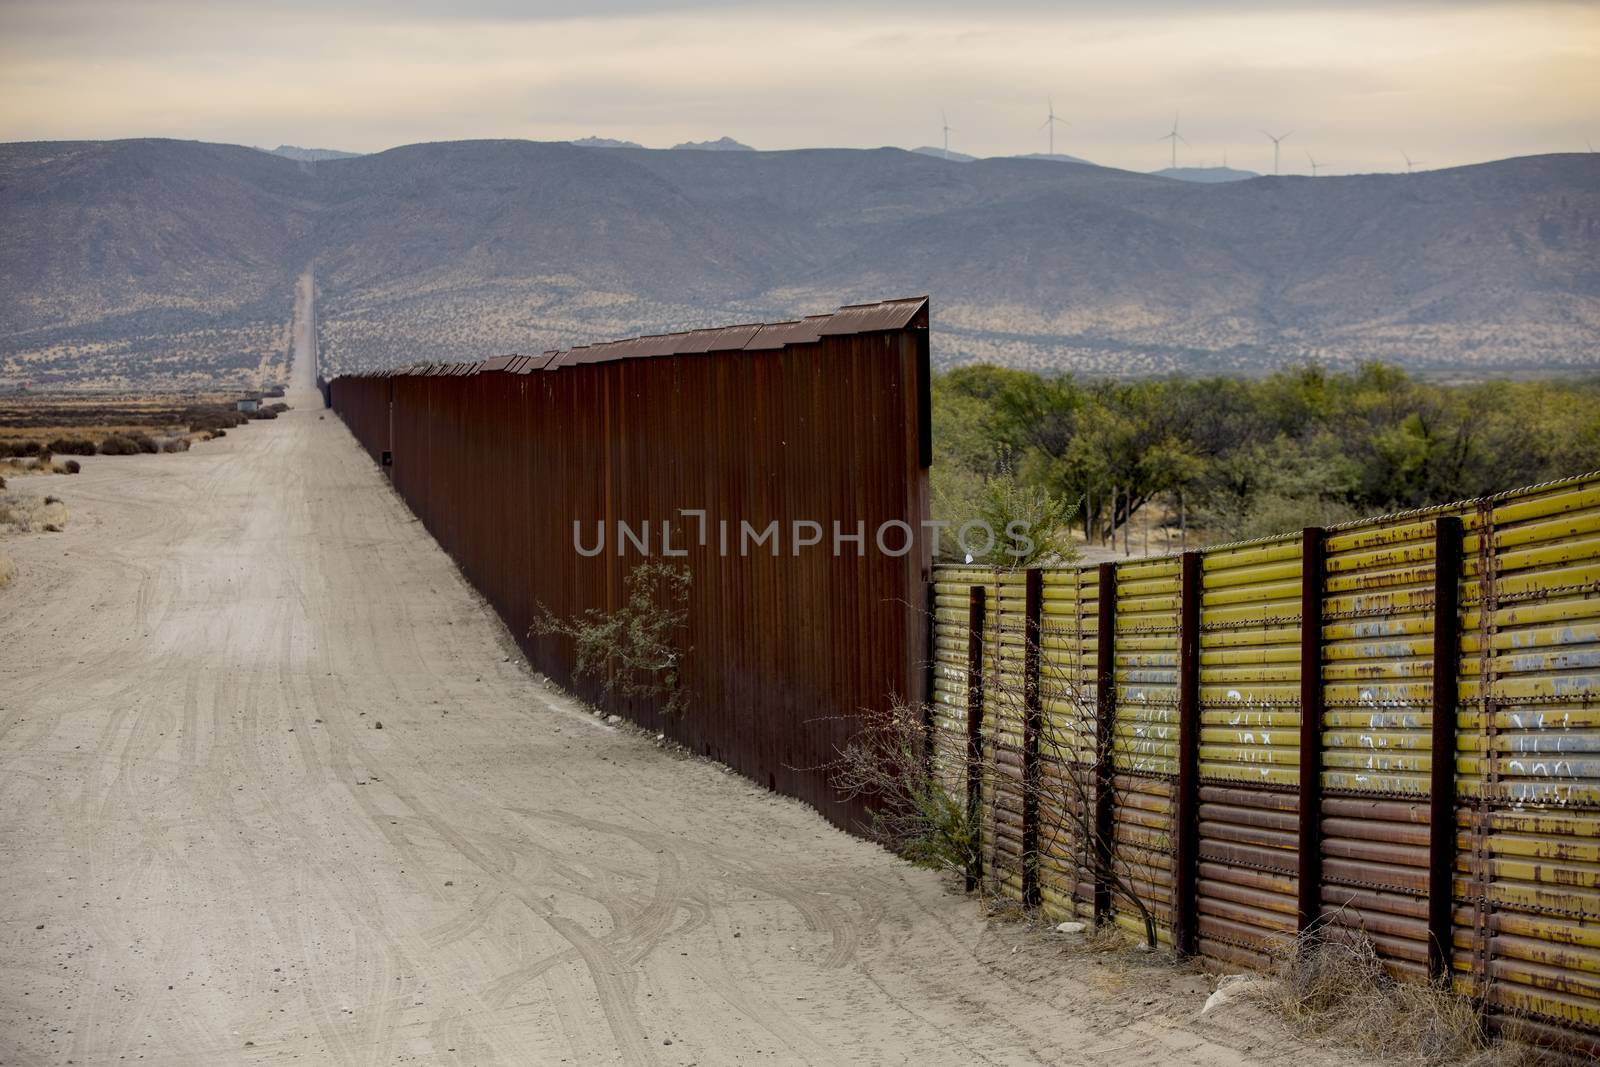 A lengthy section of the United States border wall with Mexico in California